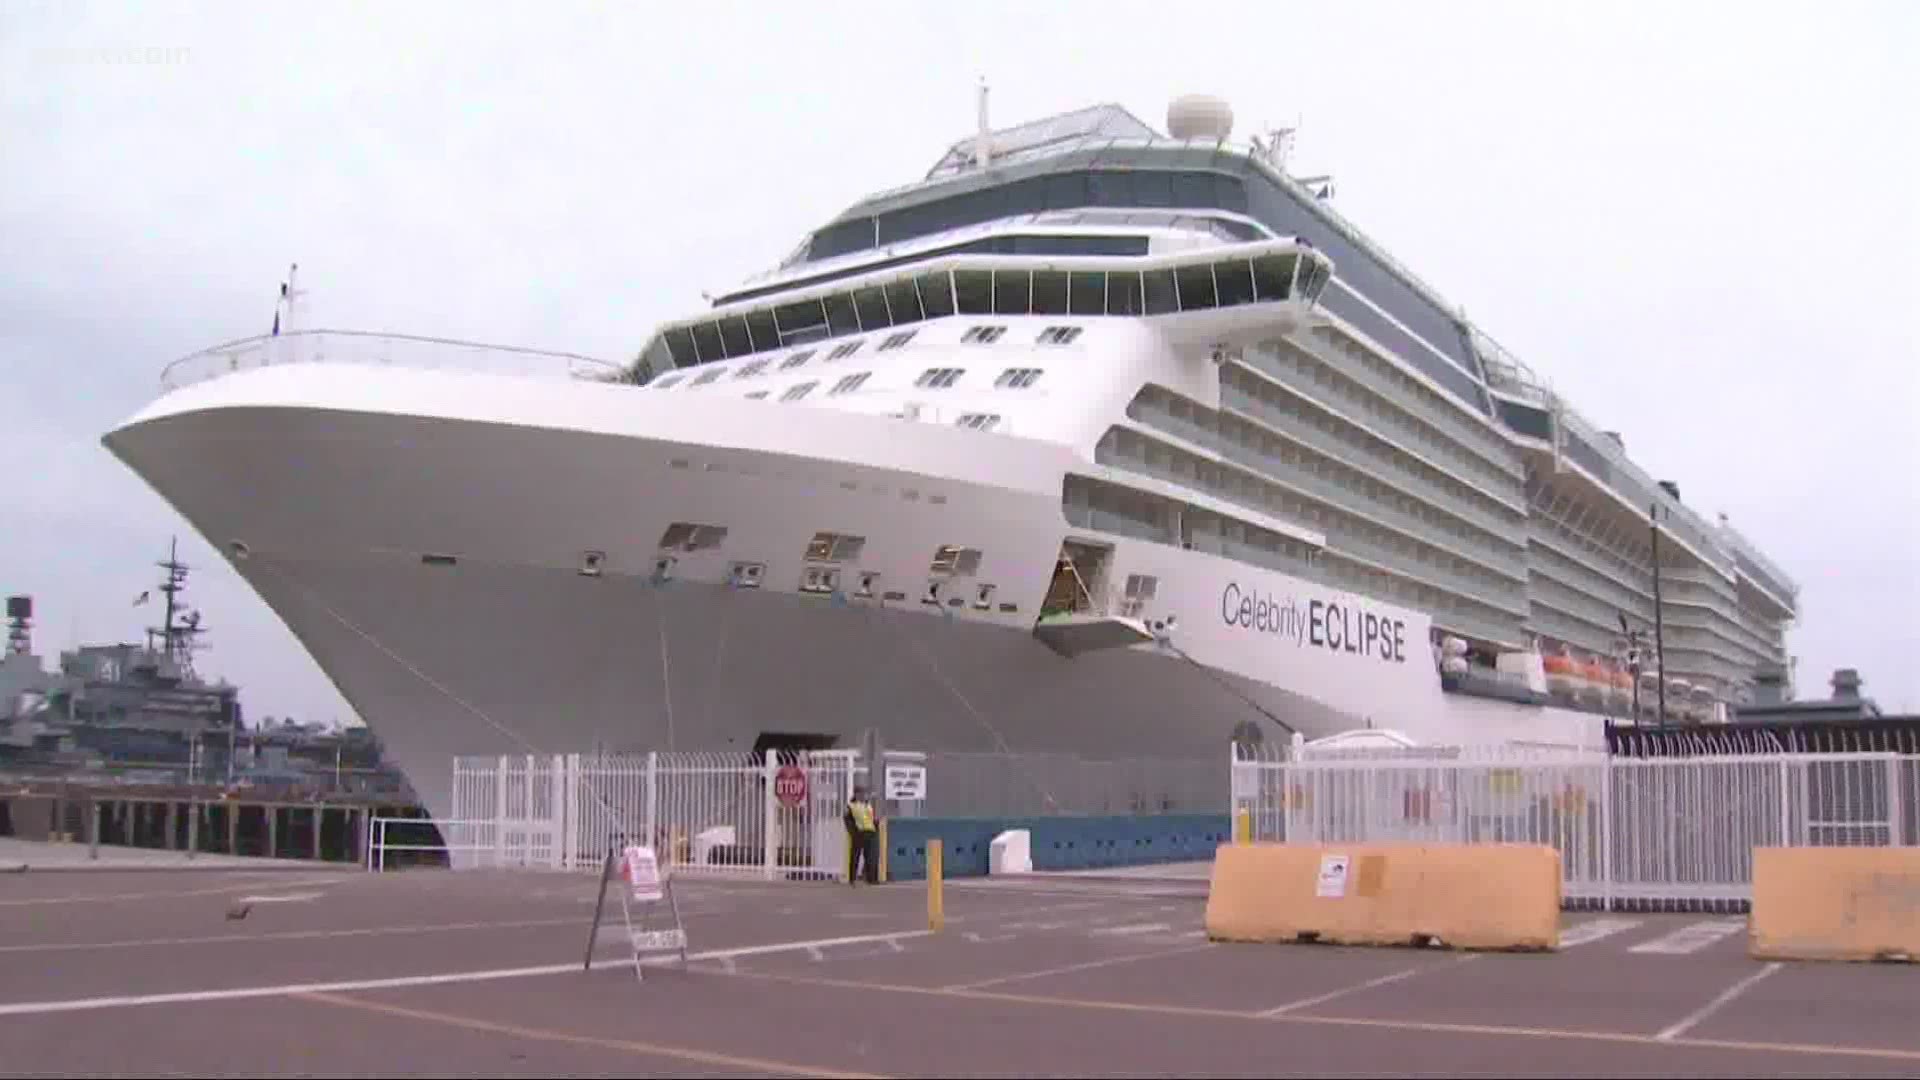 Norwegian Cruise Line wants to start sailing again on July 4th.  However, they will need CDC approval to sail from U.S. ports.